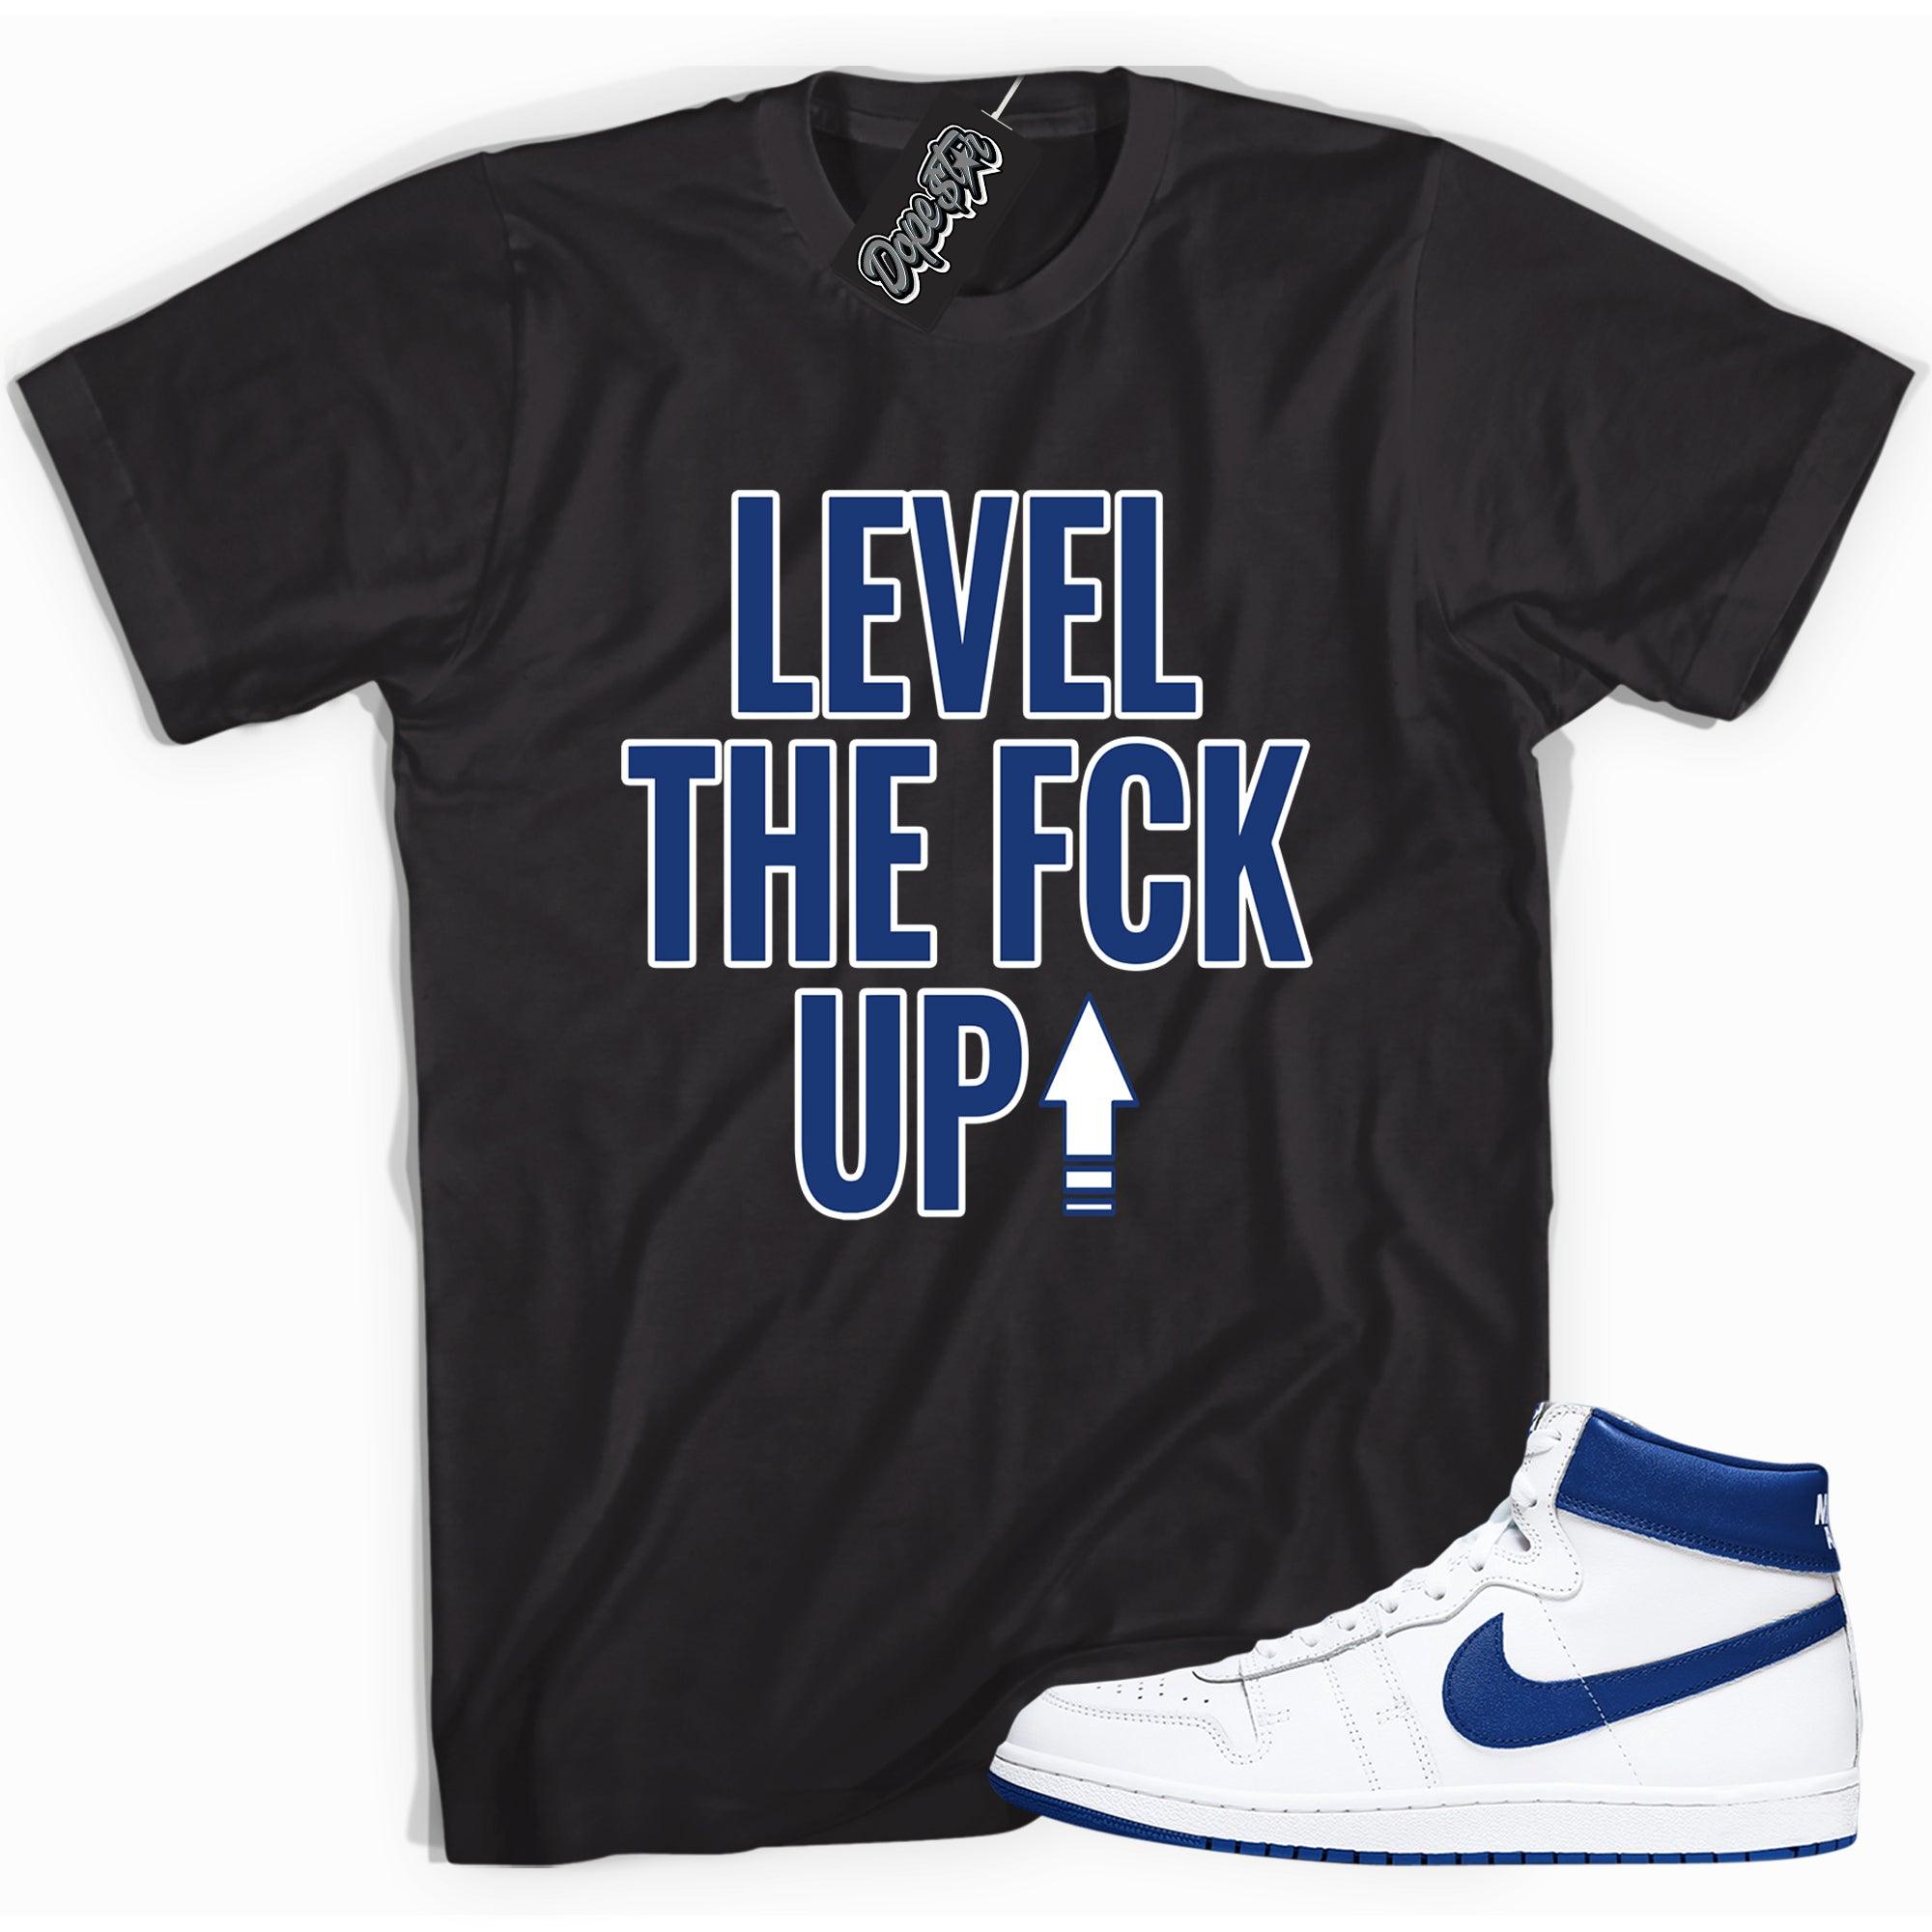 Cool black graphic tee with 'Level Up' print, that perfectly matches Nike Air Ship A Ma Maniére Game Royal sneakers.